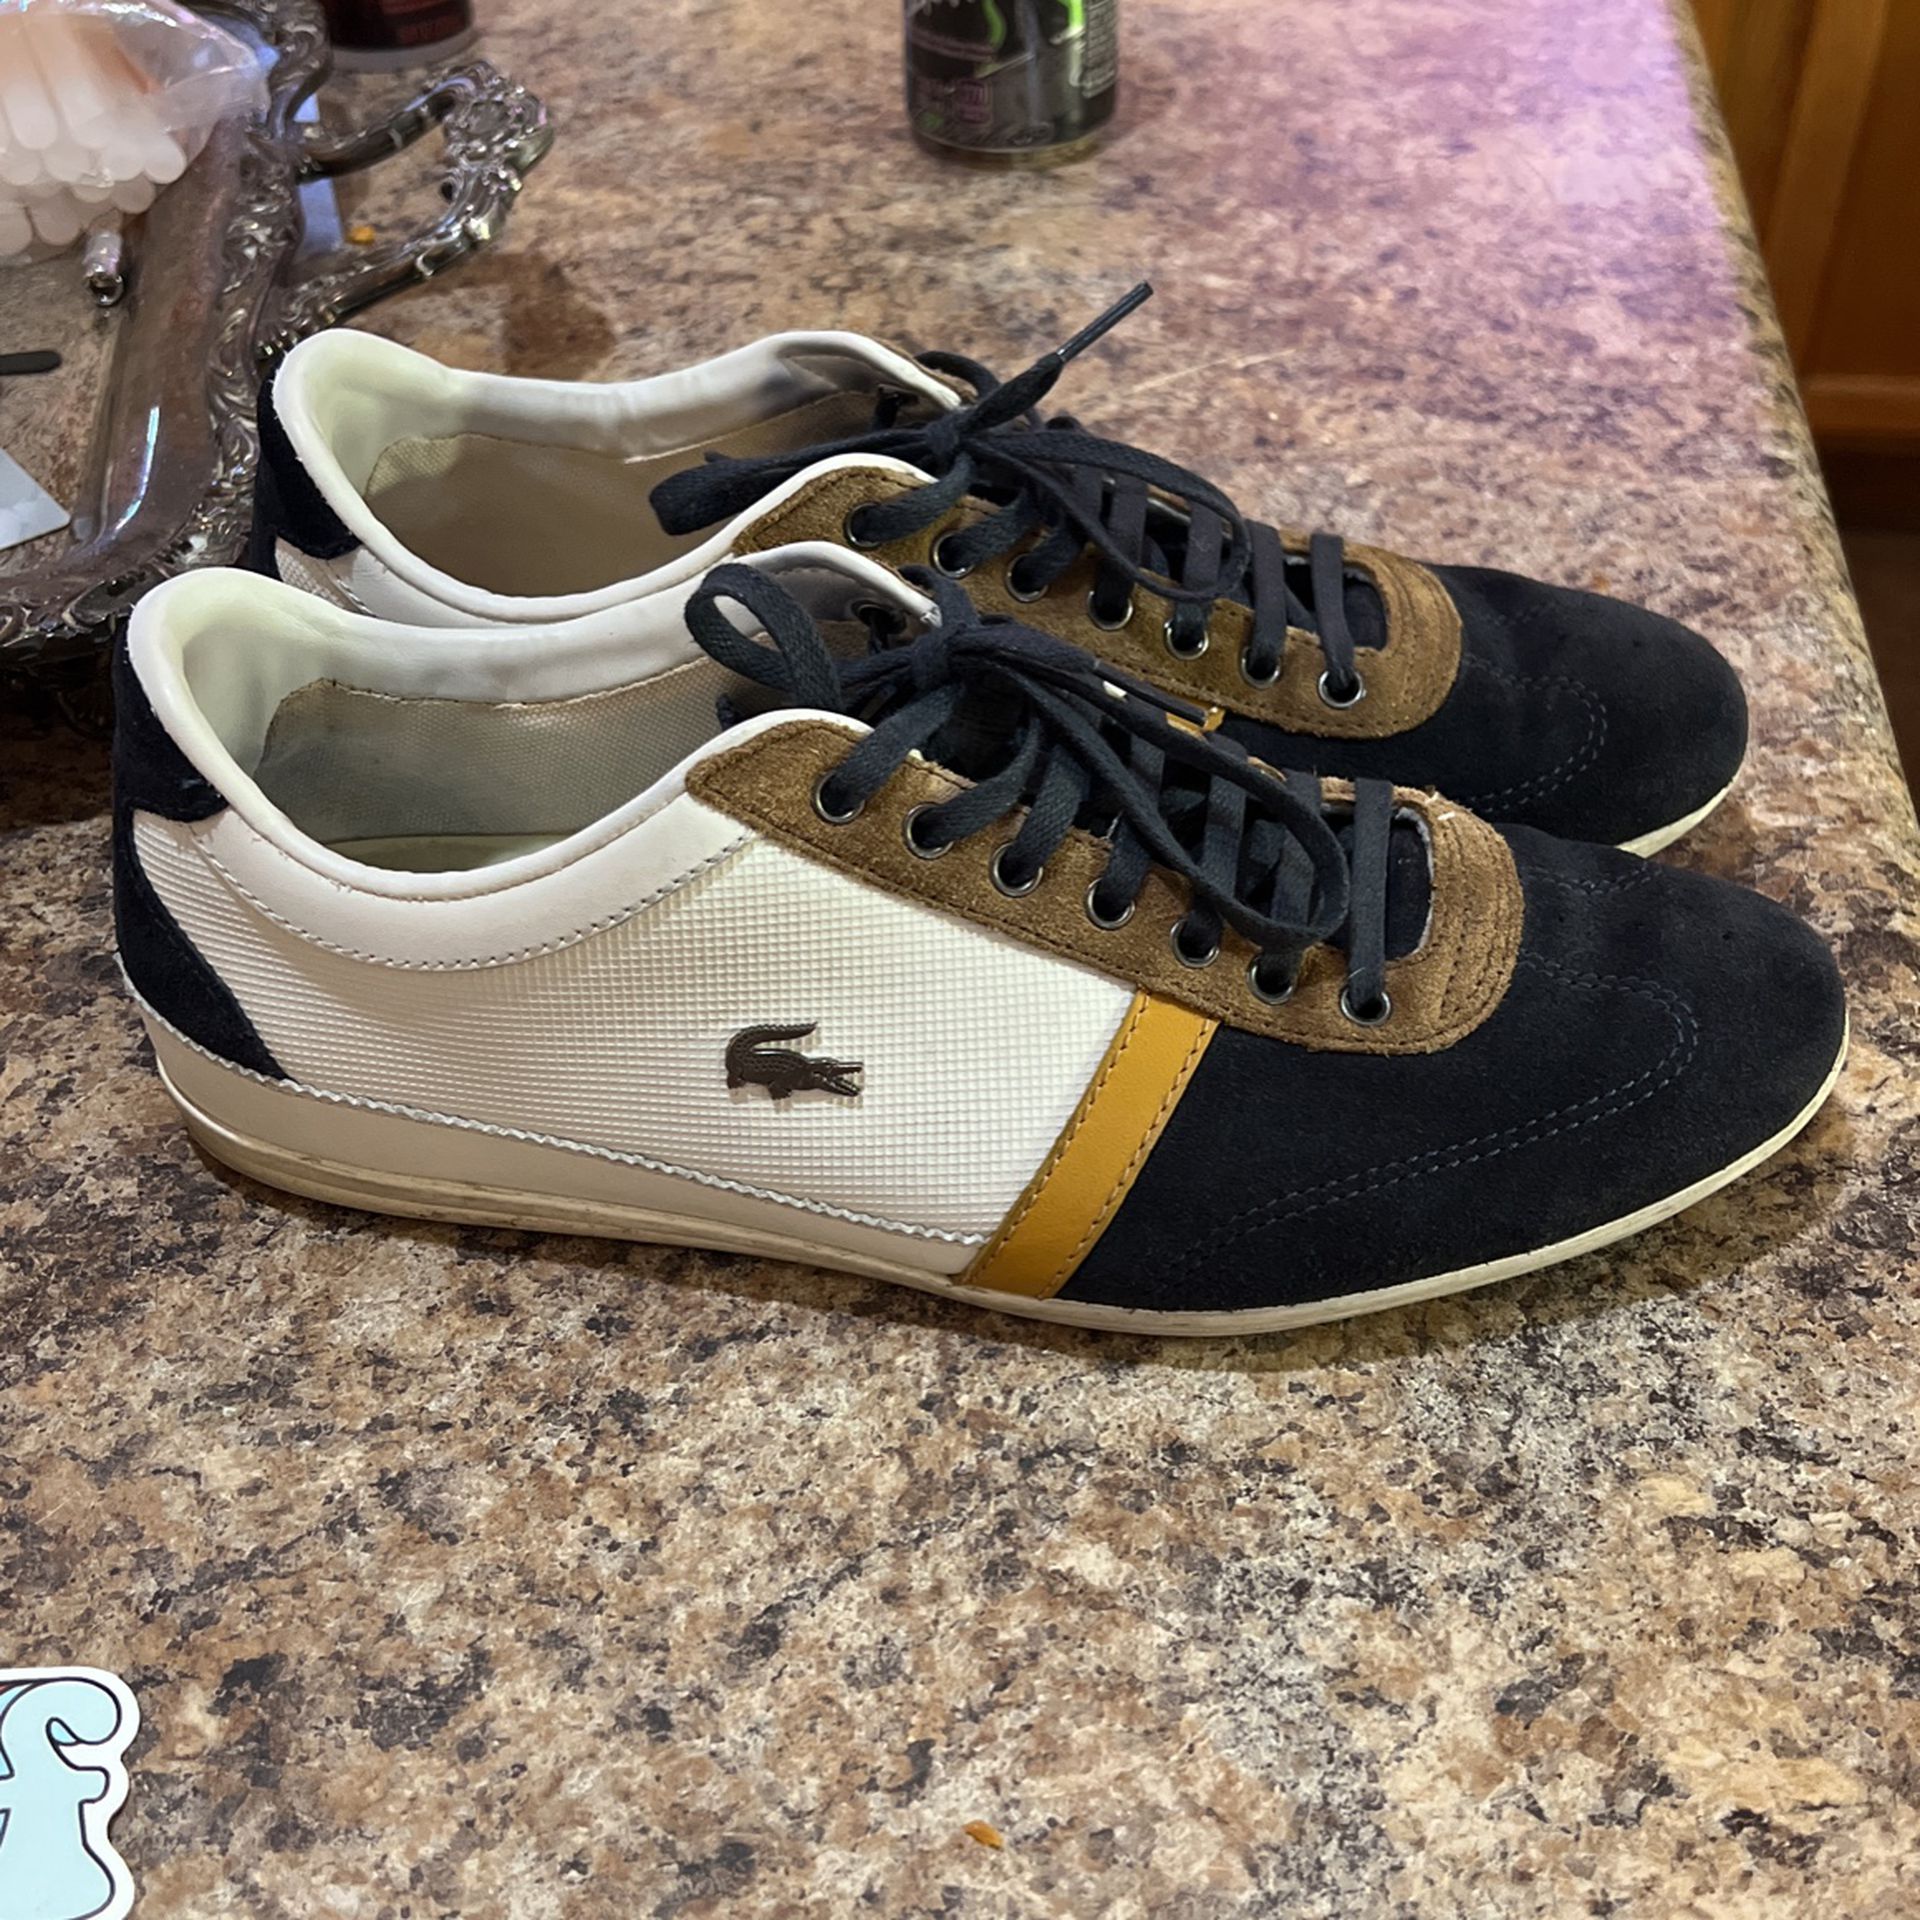 Lacoste Suede And leather men's Dress Flats shoes size $$55ibo for Sale in AZ - OfferUp